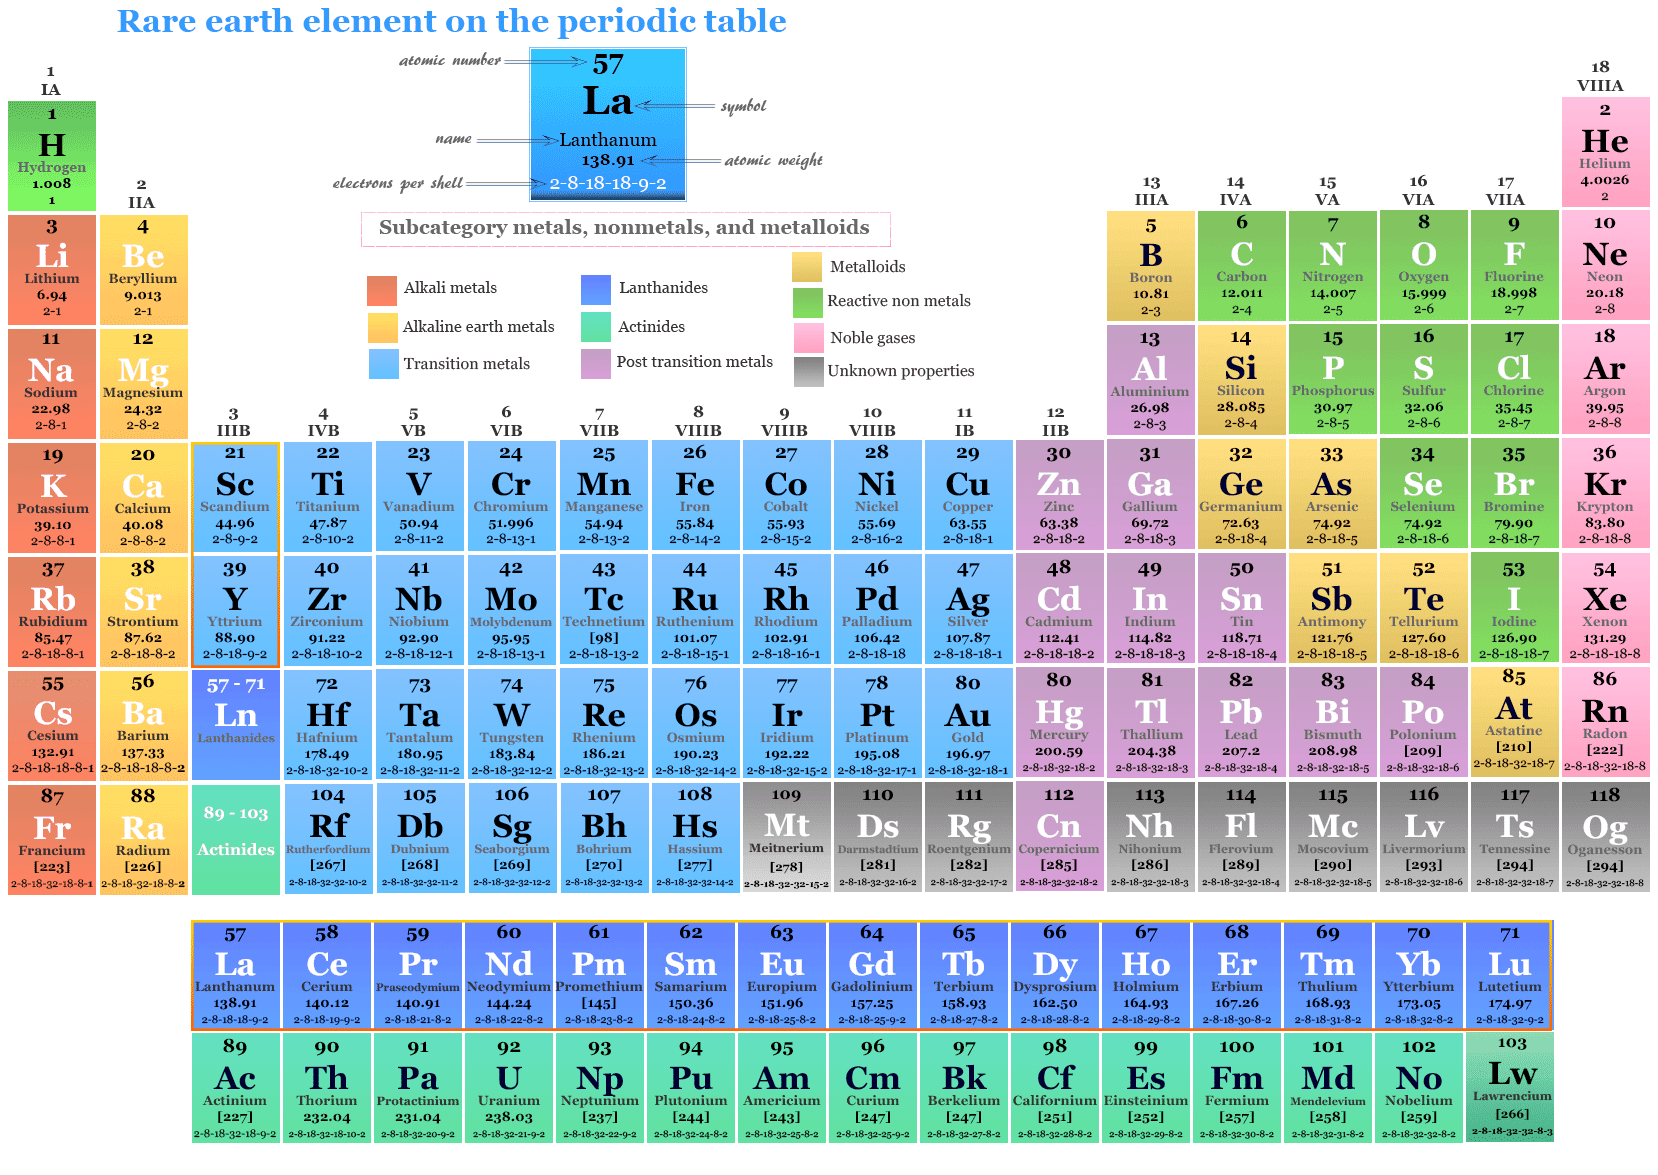 uses of rare earth elements